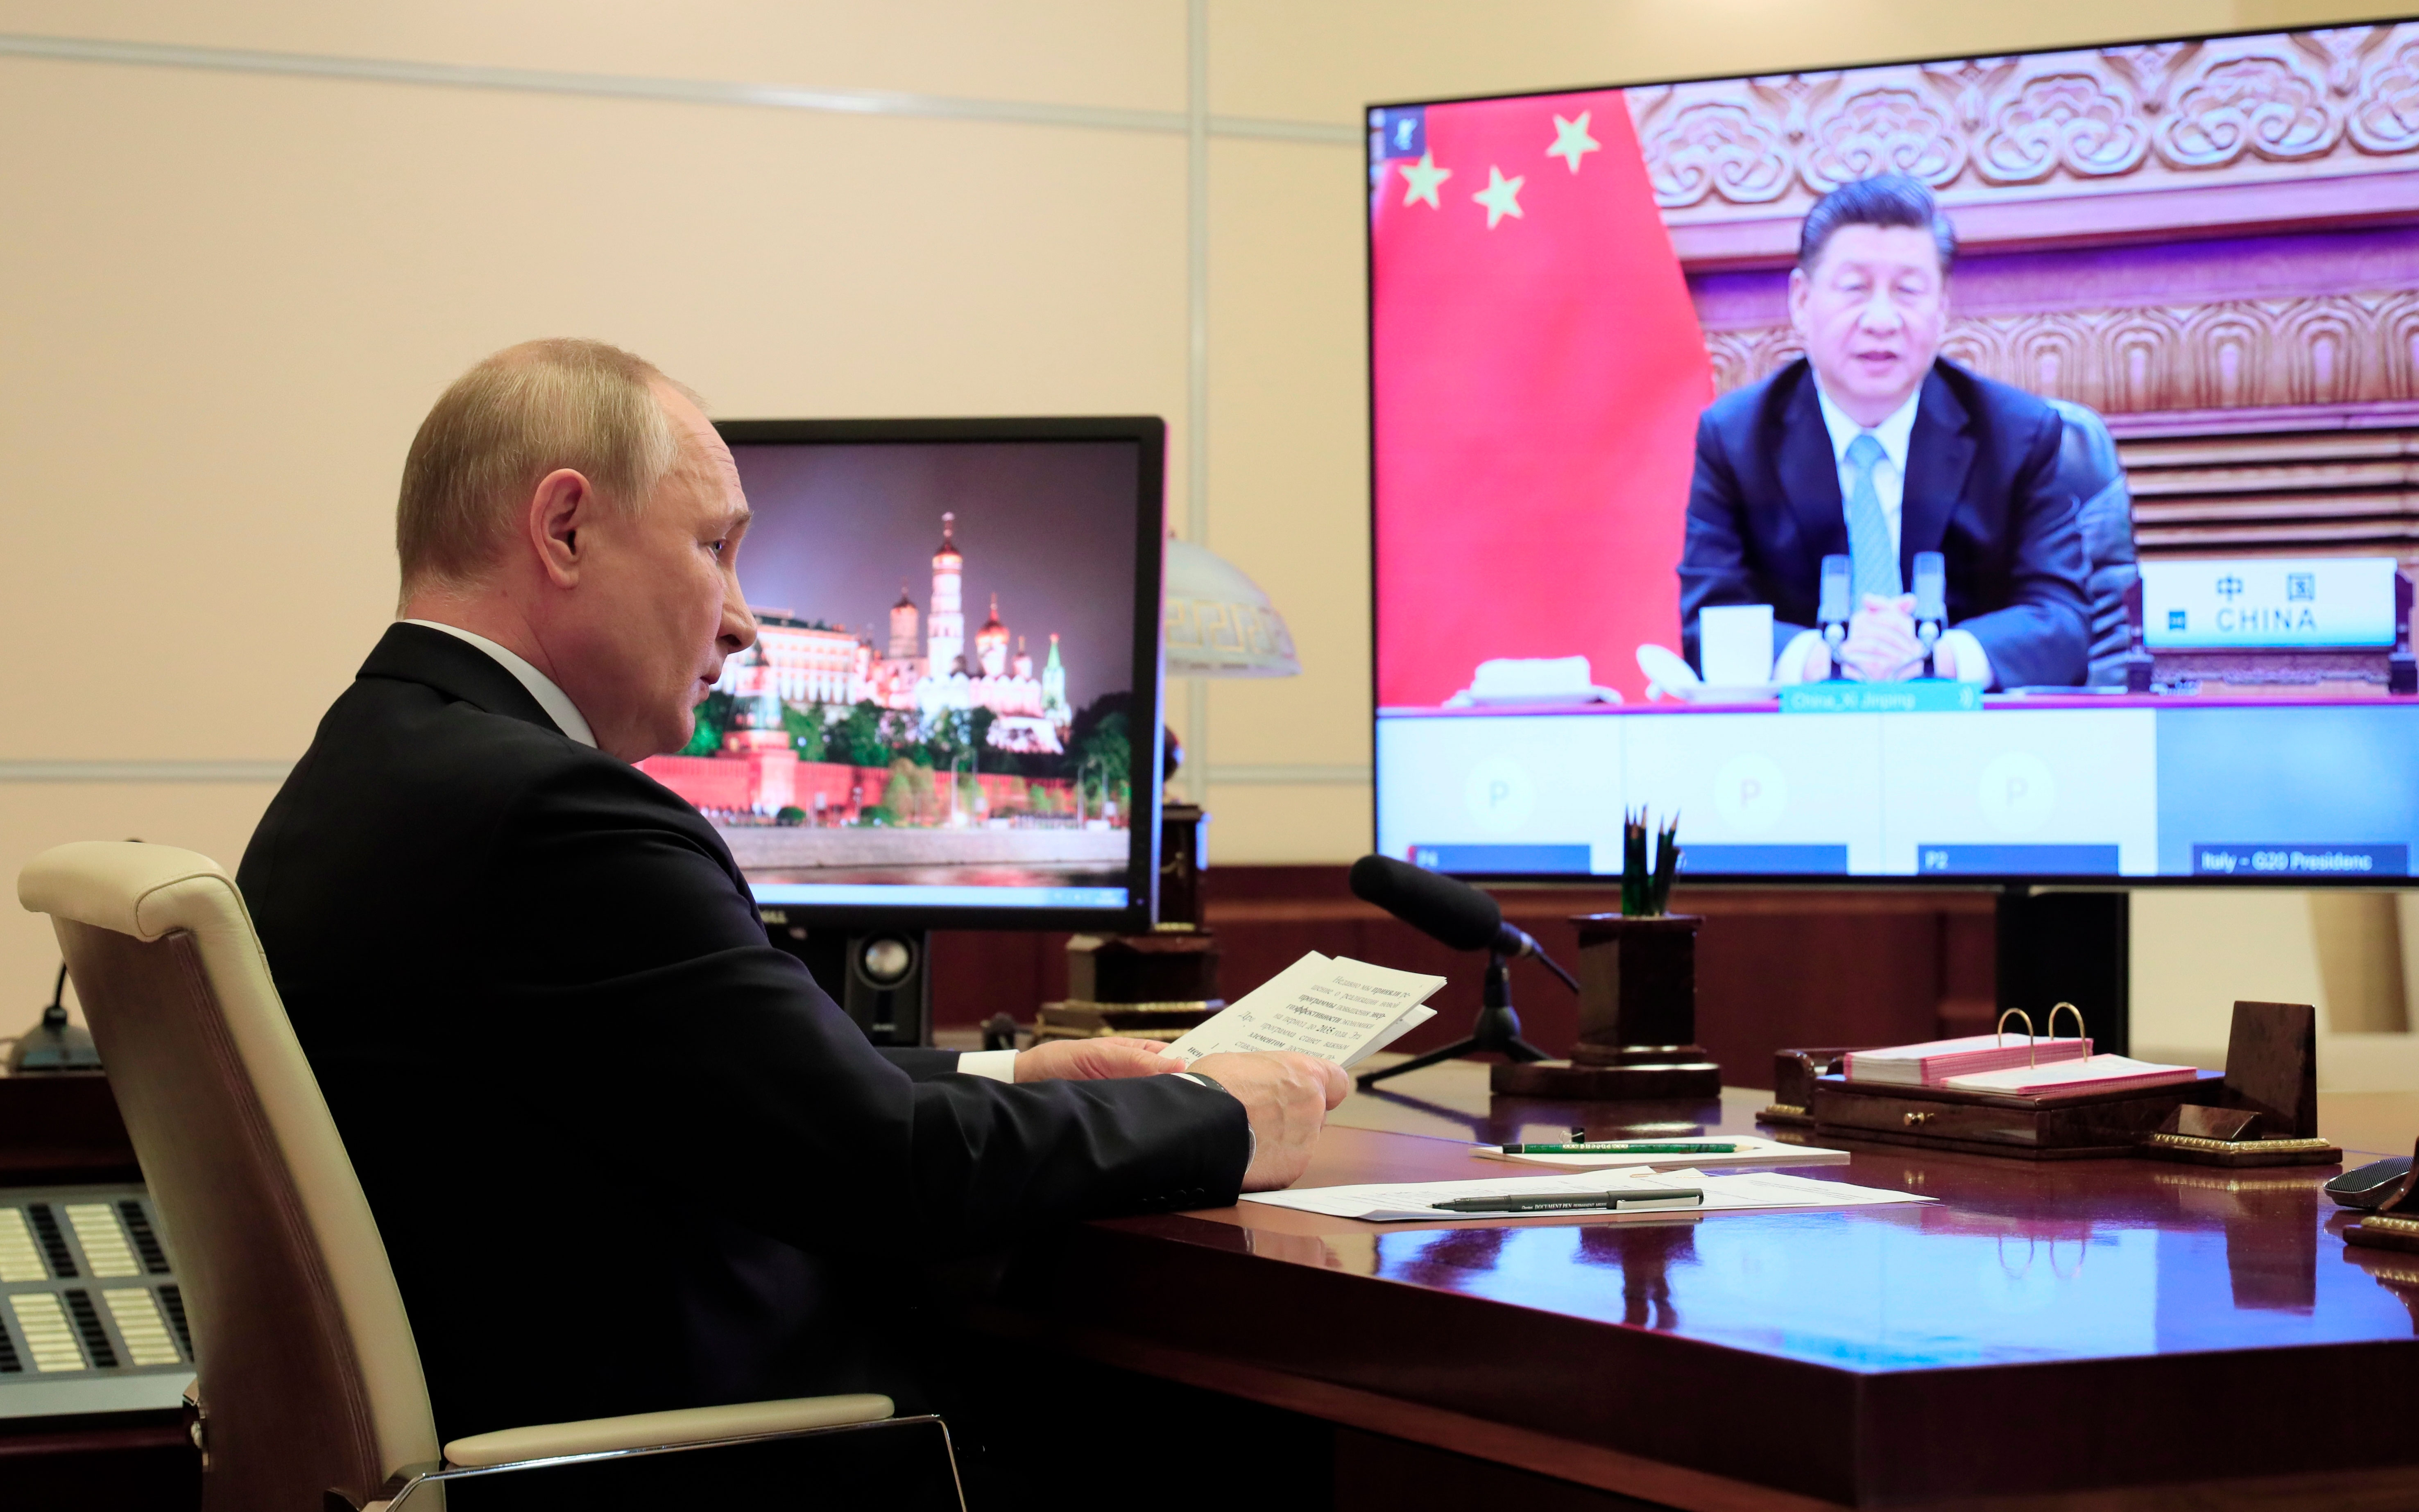 Russia's President Vladimir Putin attends the G20 summit via video at the Novo-Ogaryovo residence outside Moscow on October 31. China's President Xi Jinping is on the display.